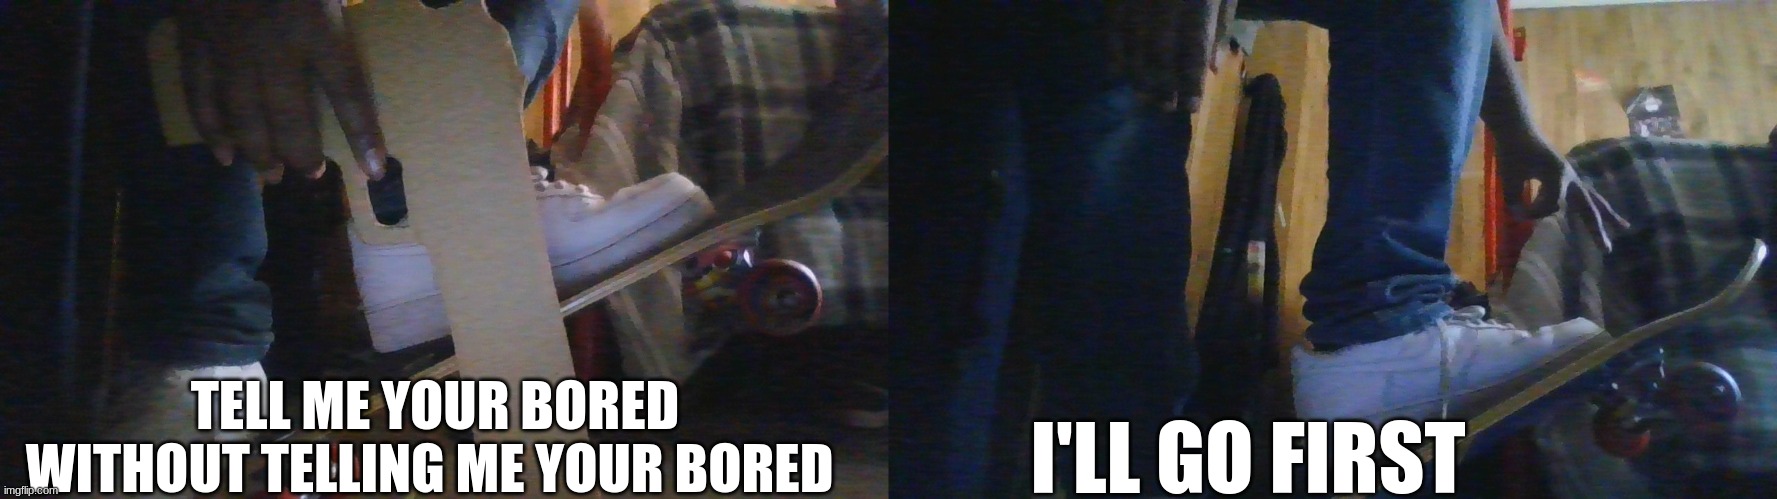 tell me | TELL ME YOUR BORED WITHOUT TELLING ME YOUR BORED; I'LL GO FIRST | image tagged in boredom | made w/ Imgflip meme maker